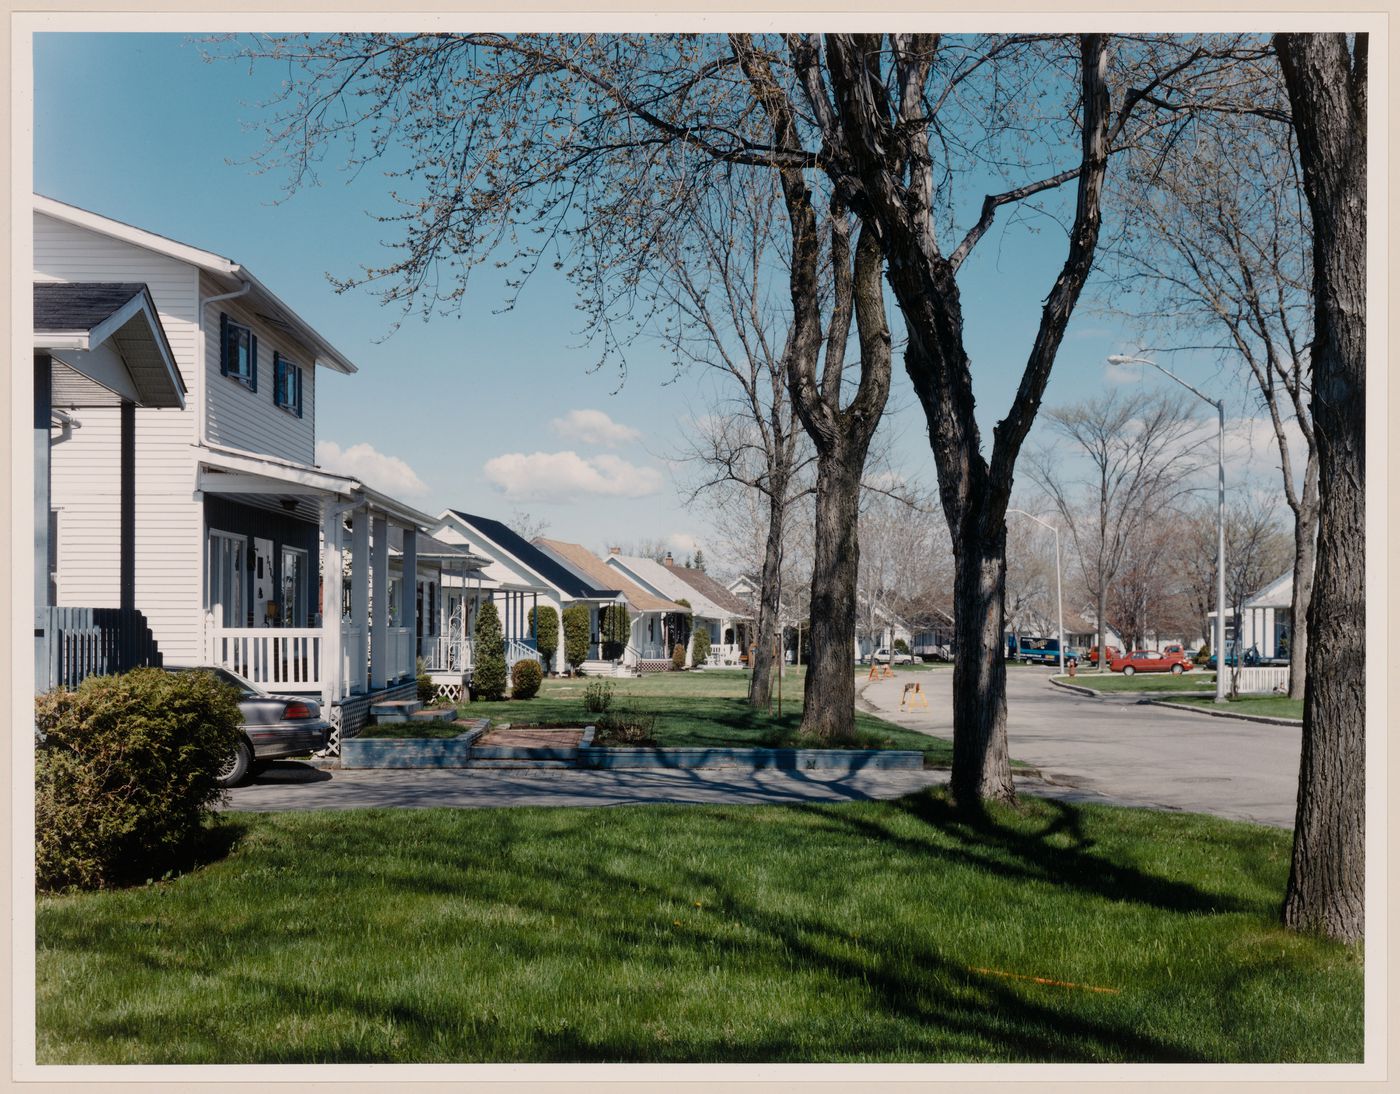 Section 1 of 2 of Panorama of workers' housing built by Wartime Housing Limited, 1941-46 rue Lamarche at rue Poitras looking northwest, Arvida, Quebec